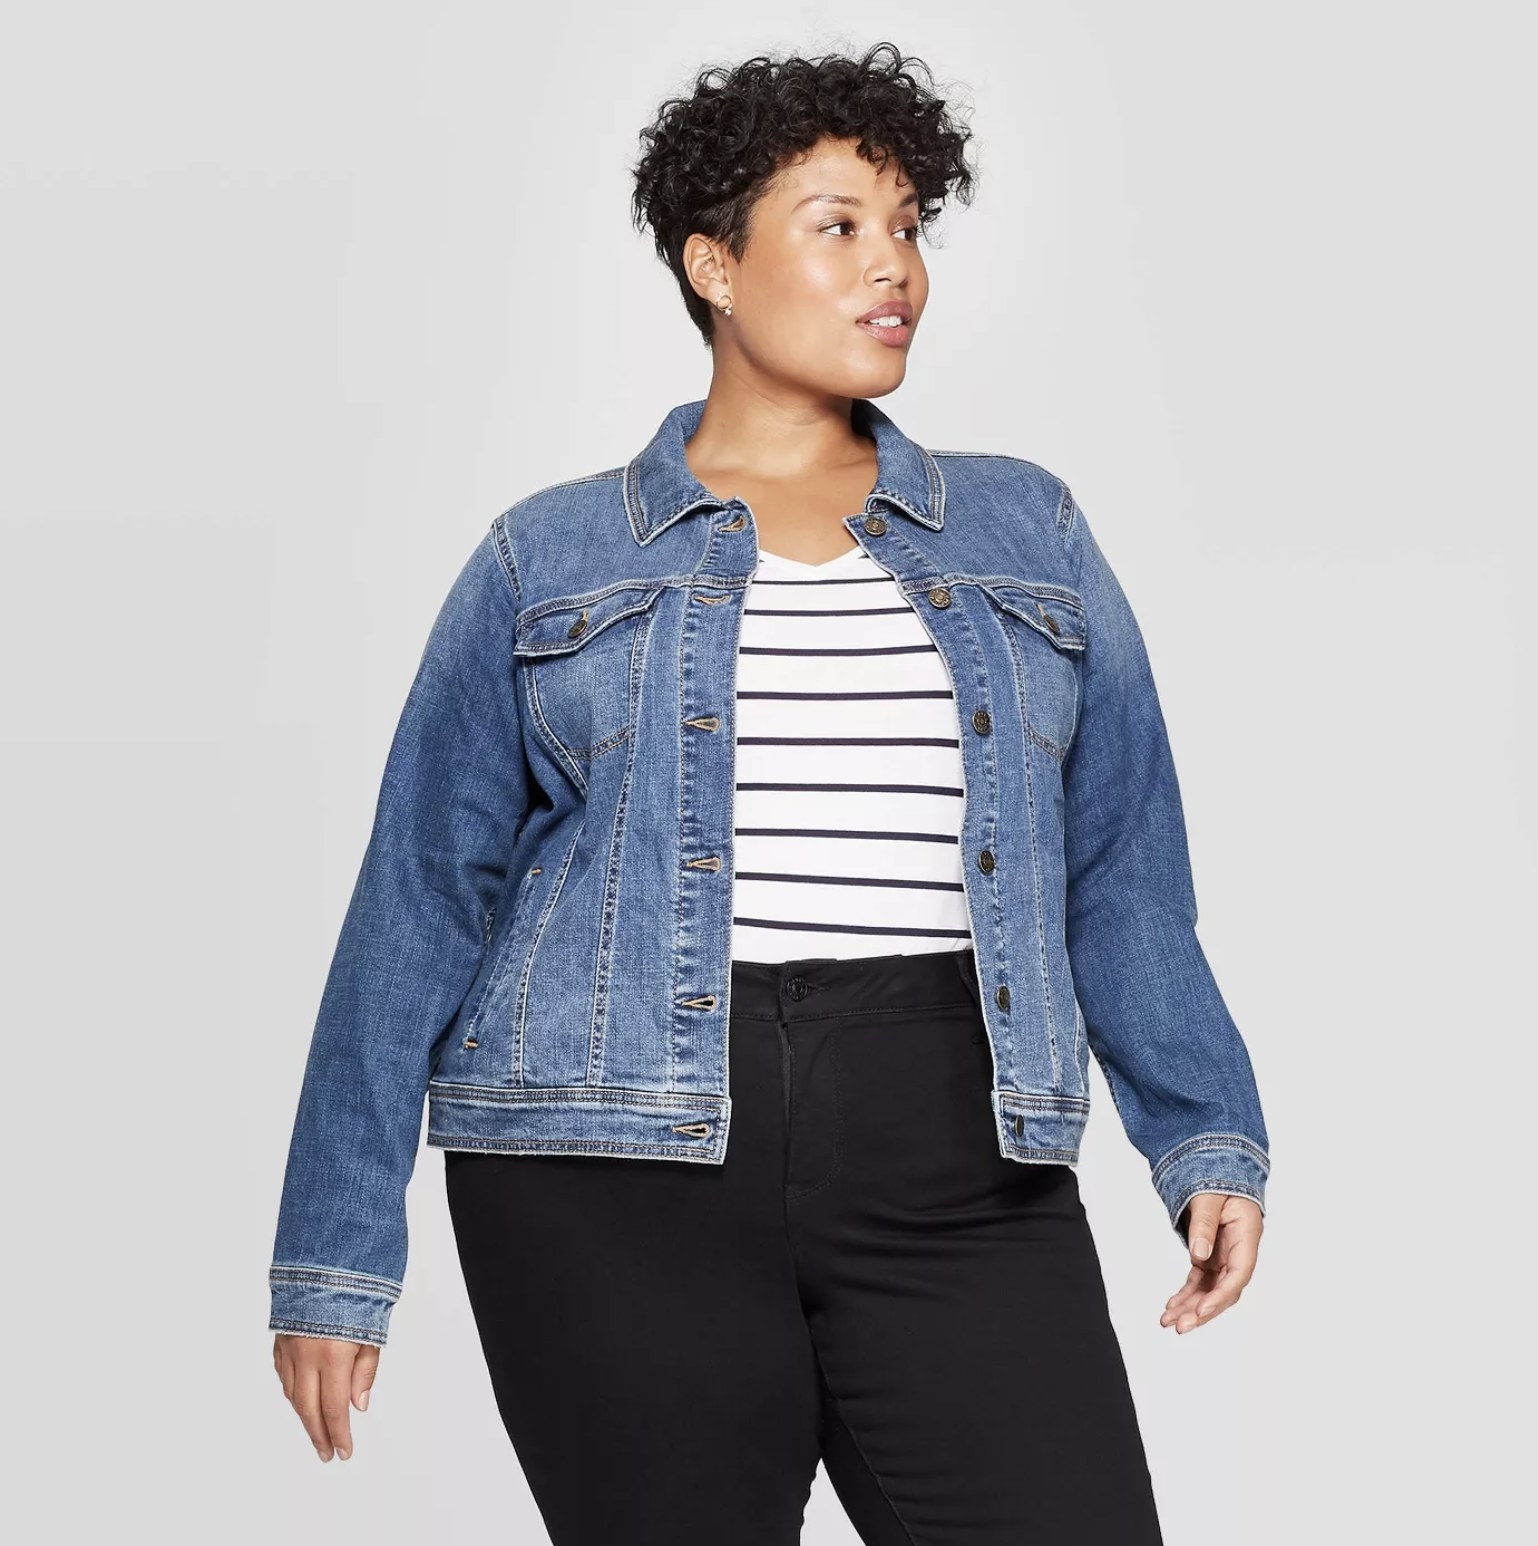 Model is wearing a blue denim jacket, a striped shirt, and black pants